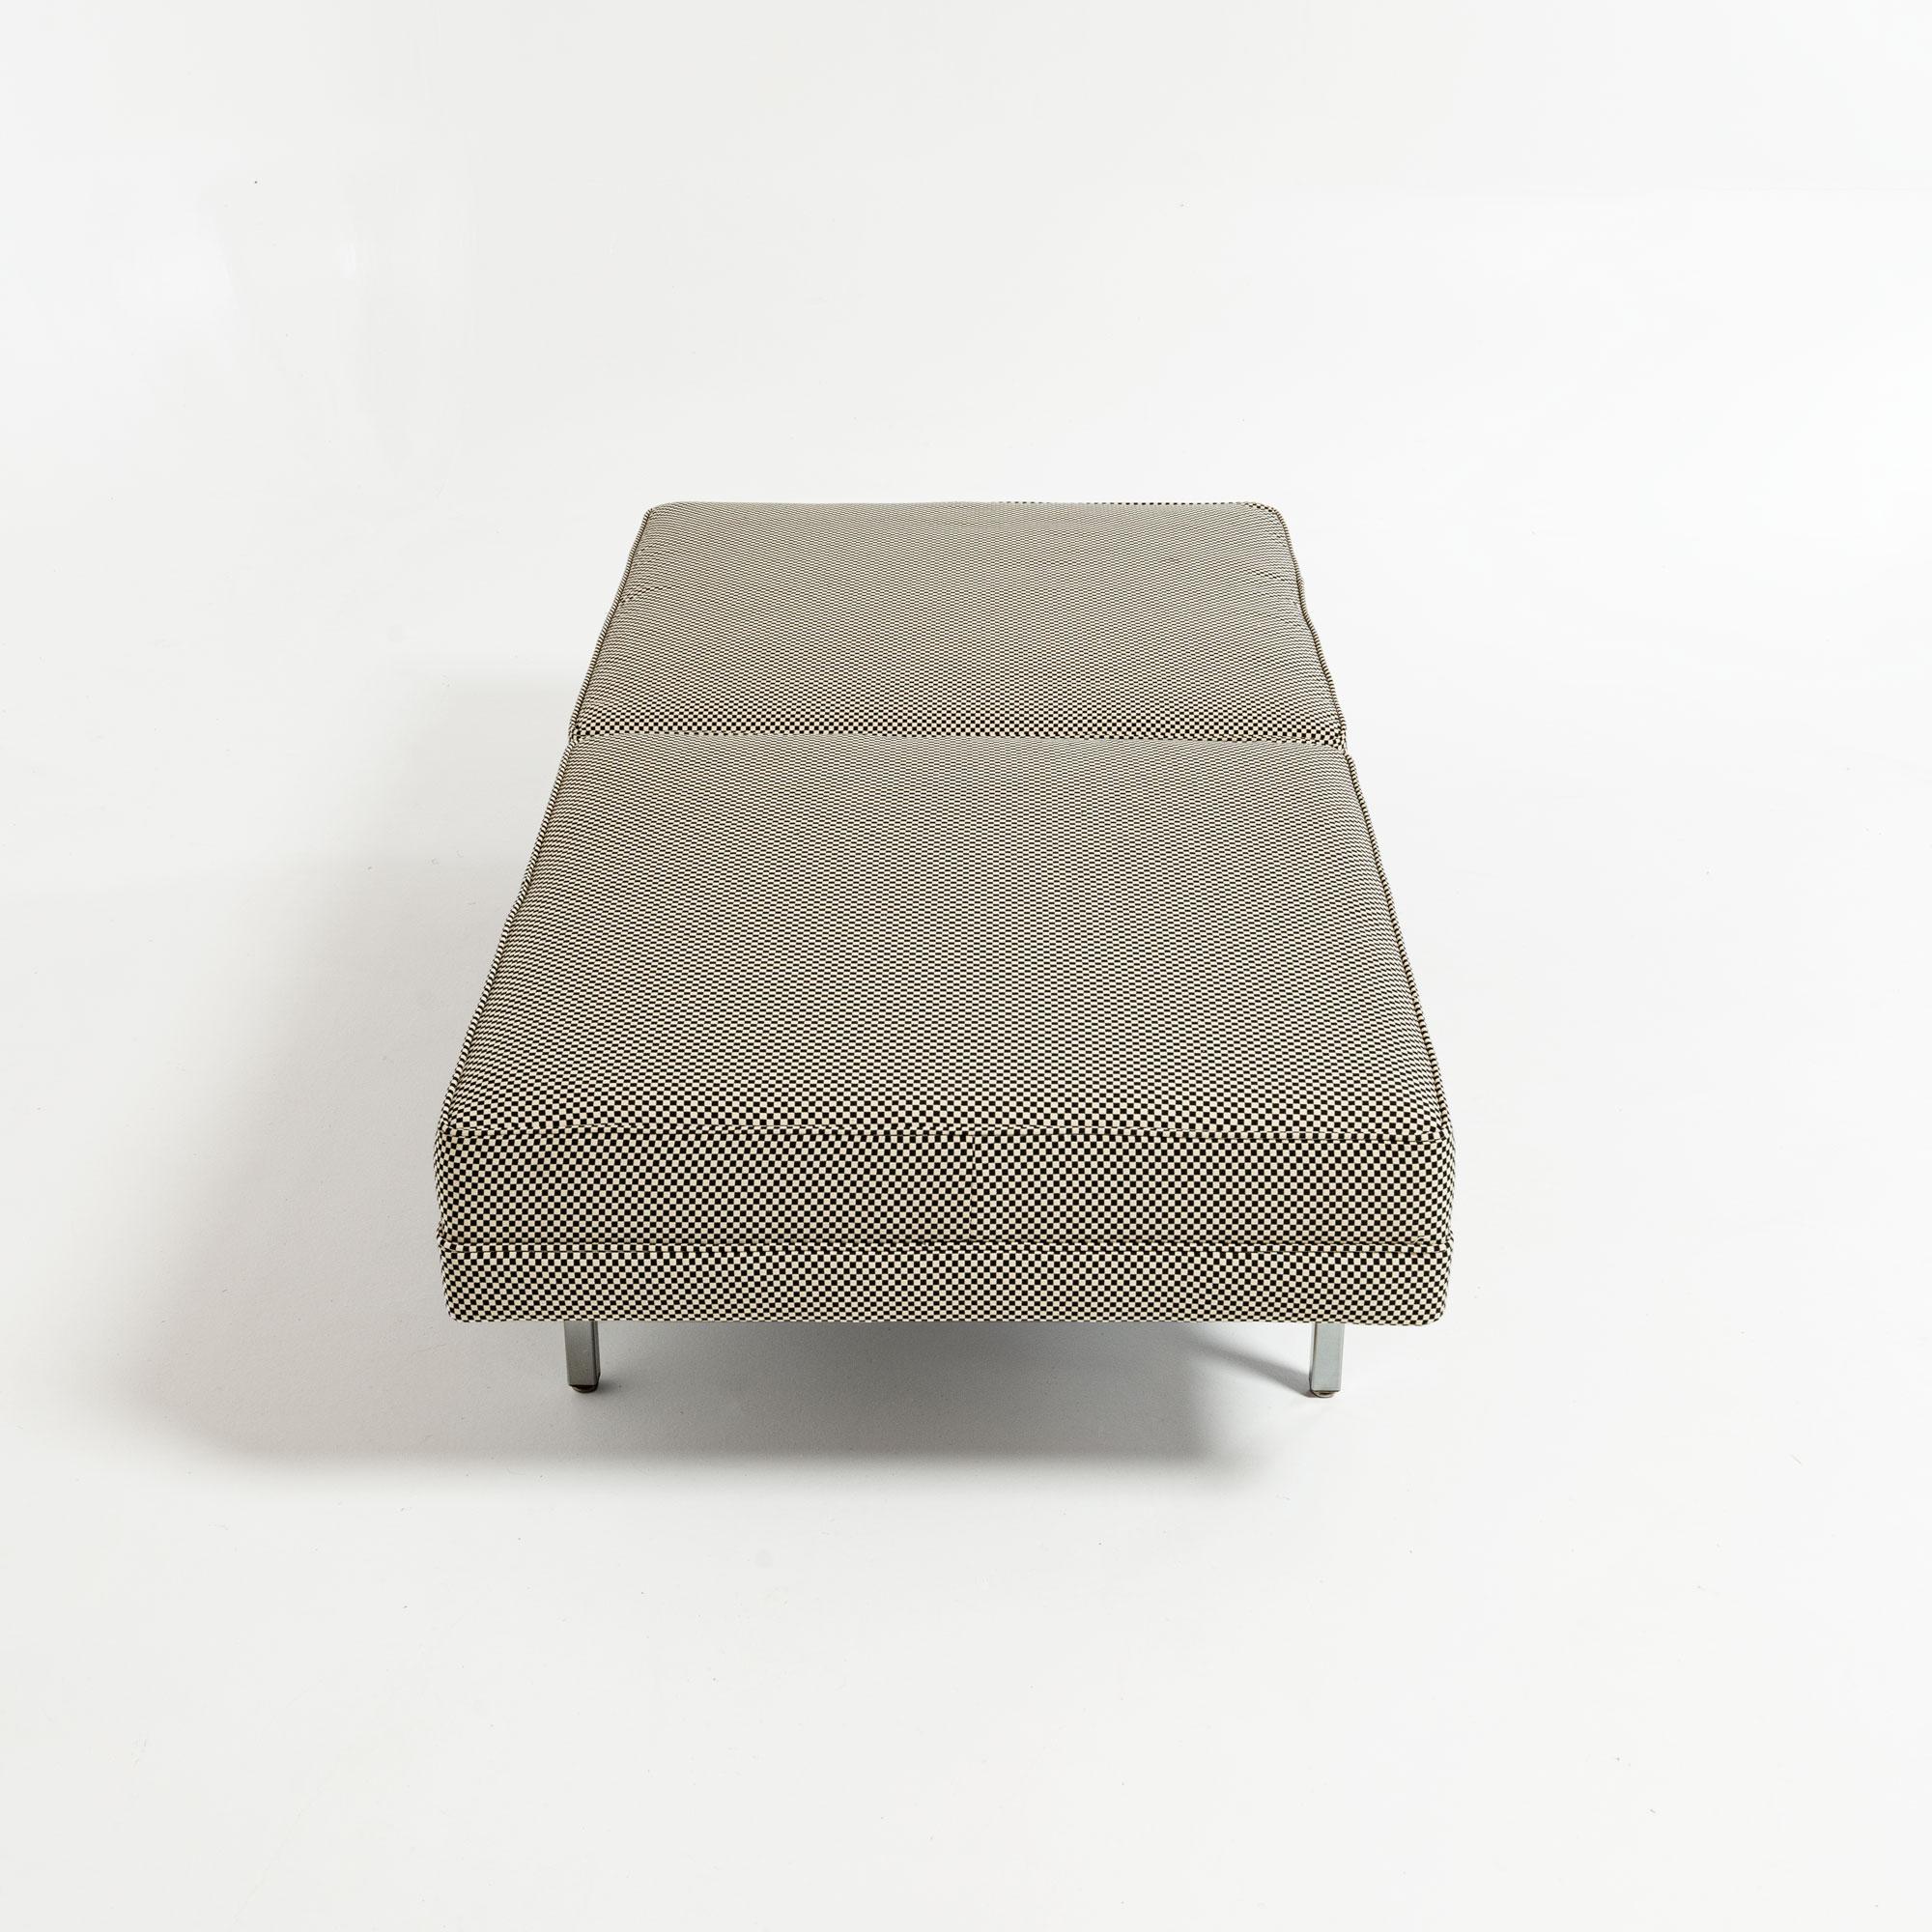 American George Nelson Modular Seating System Bench in Alexander Girard Checker Fabric For Sale